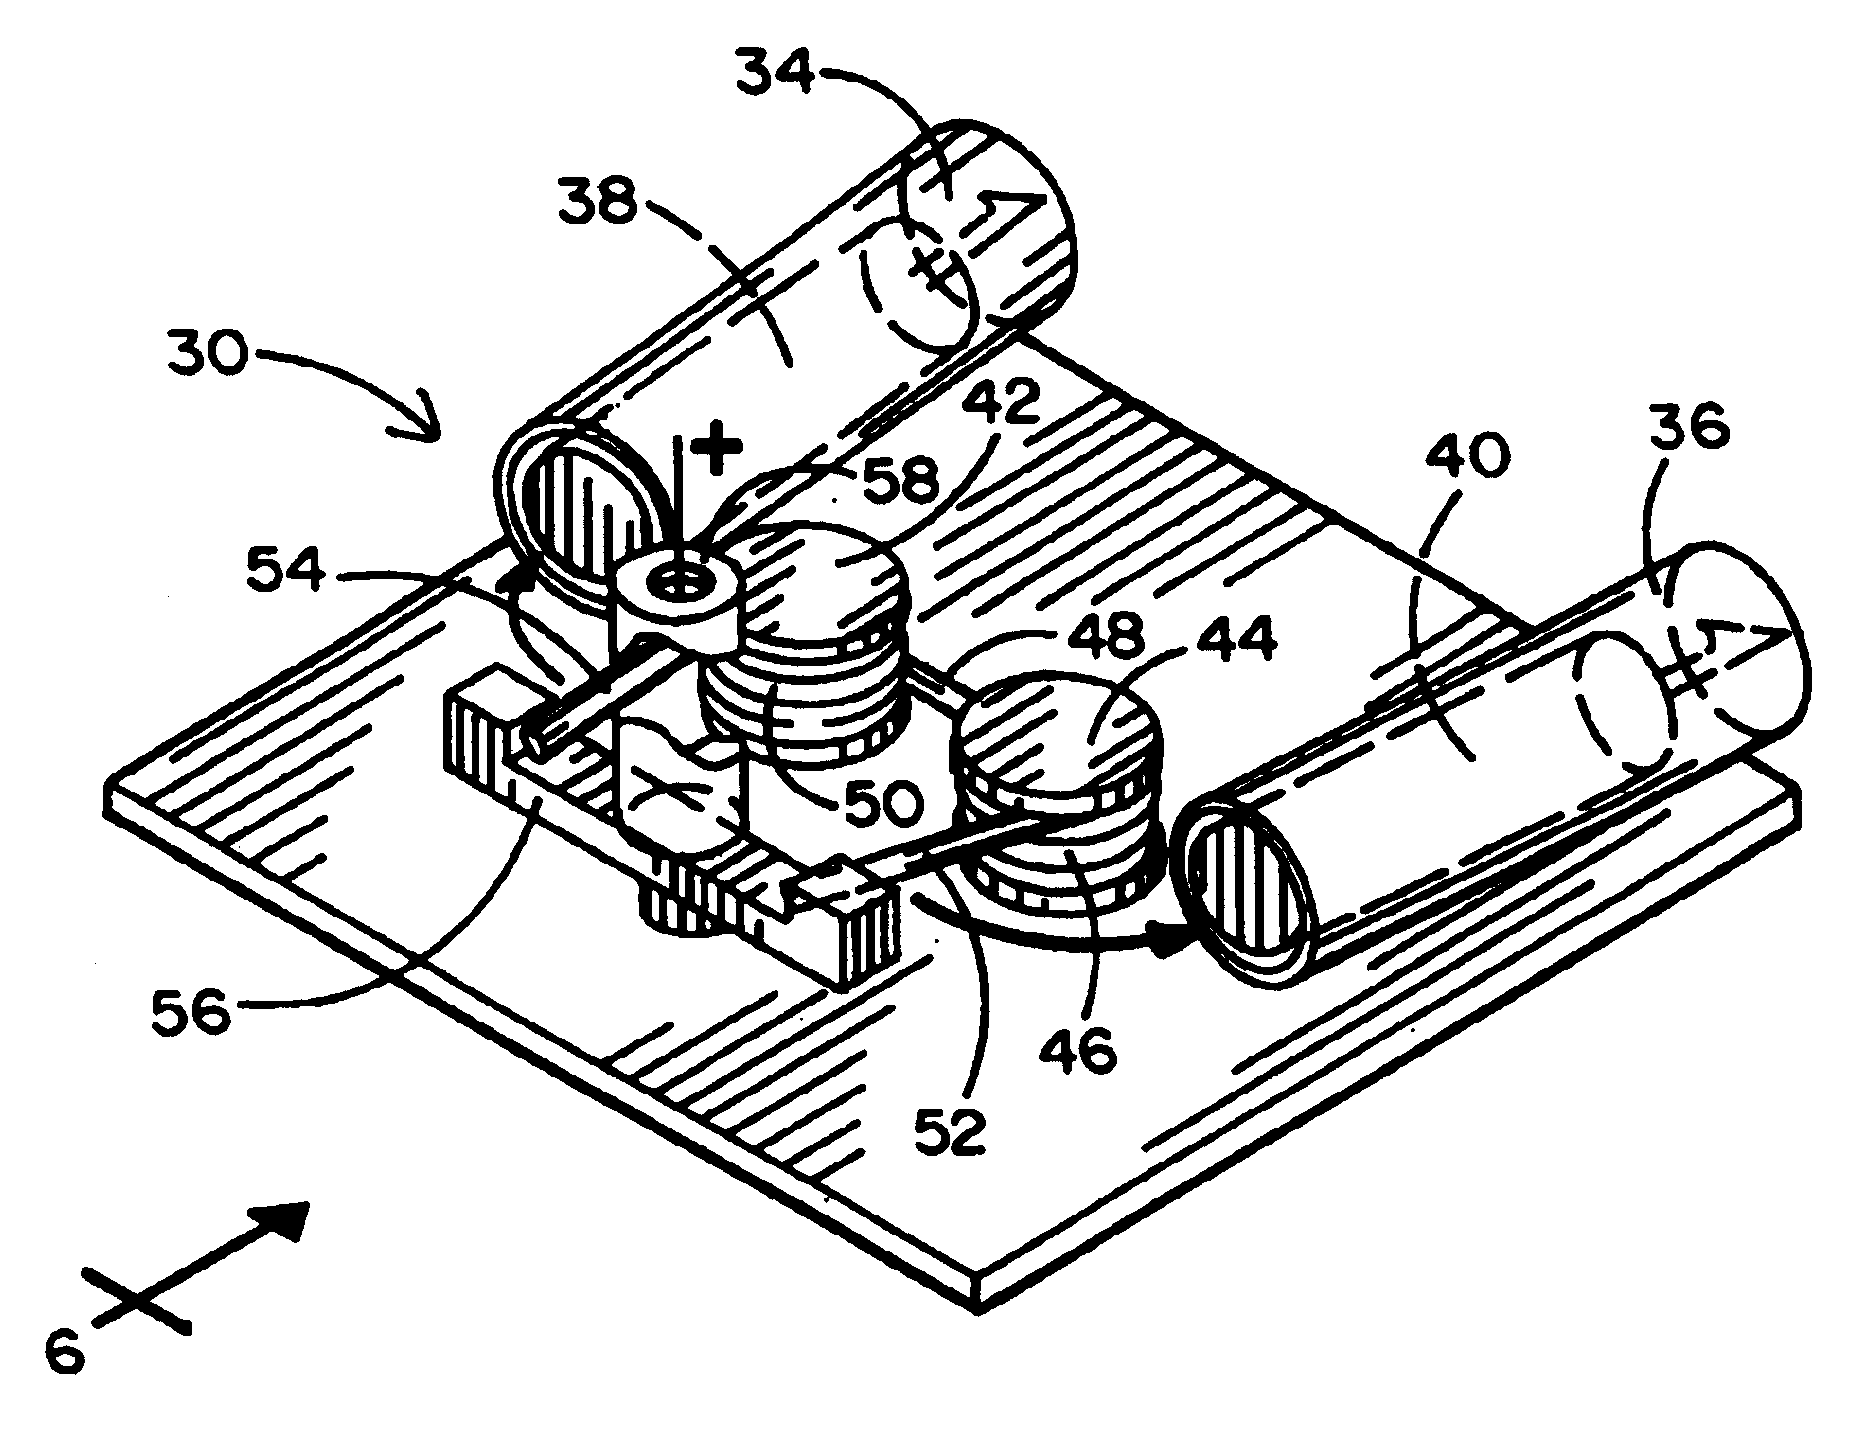 Dart propulsion system for an electrical discharge weapon